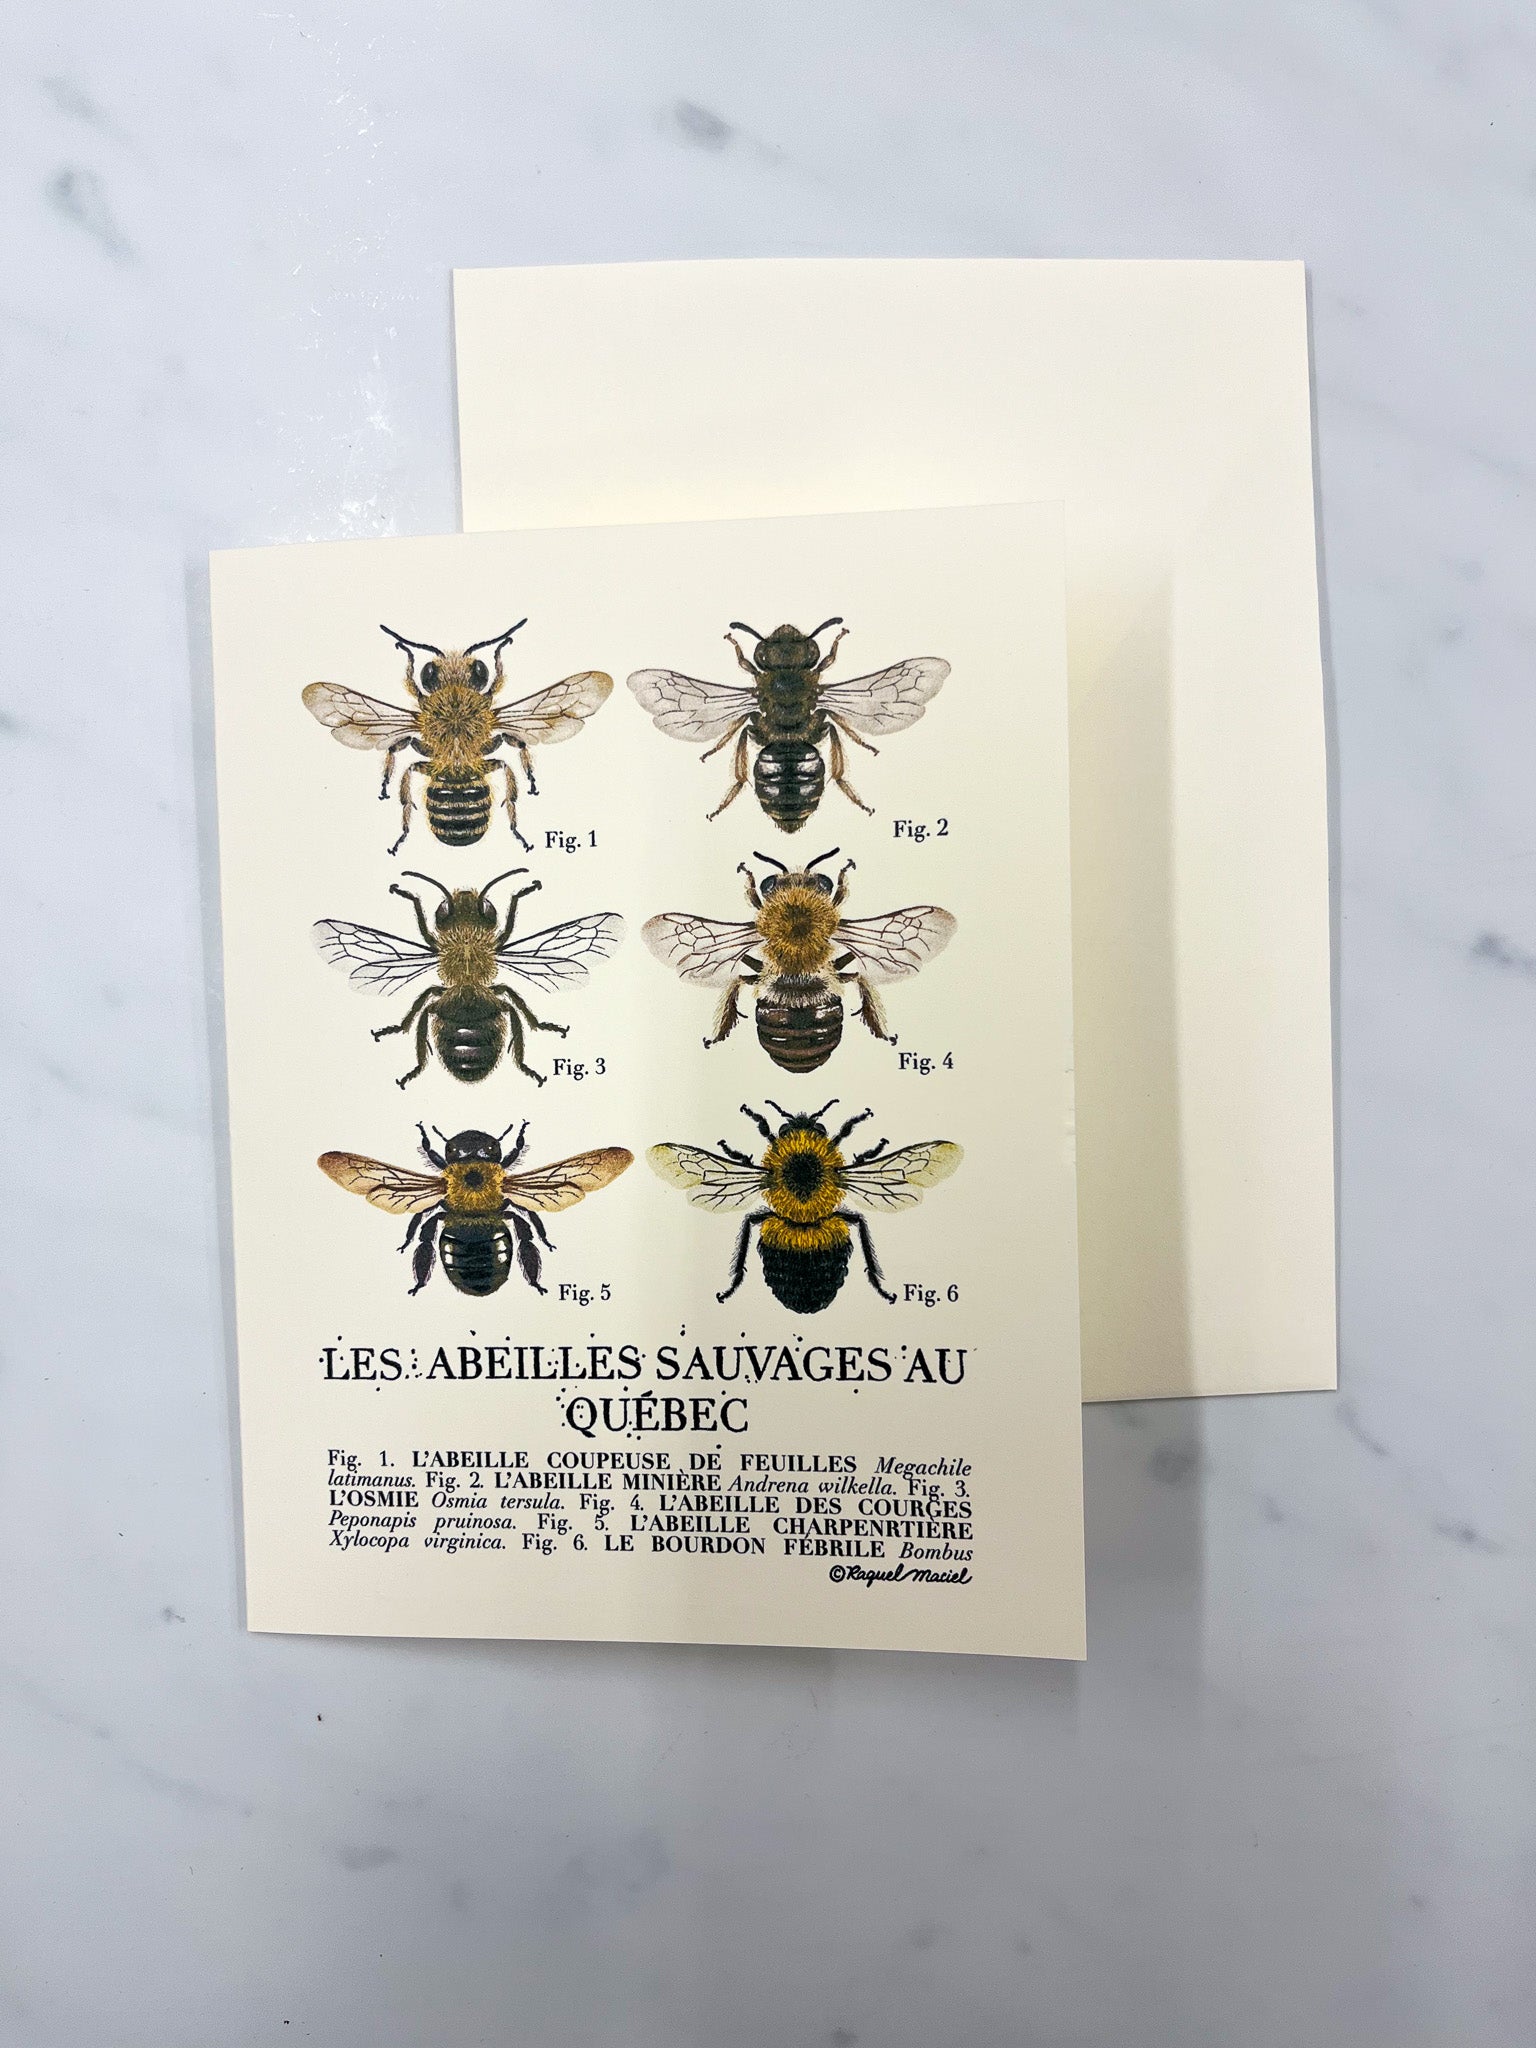 Beige card and envelope with "Les Abeilles Sauvages au Quebec" along with illustrations of 6 different varieties of Quebec bees